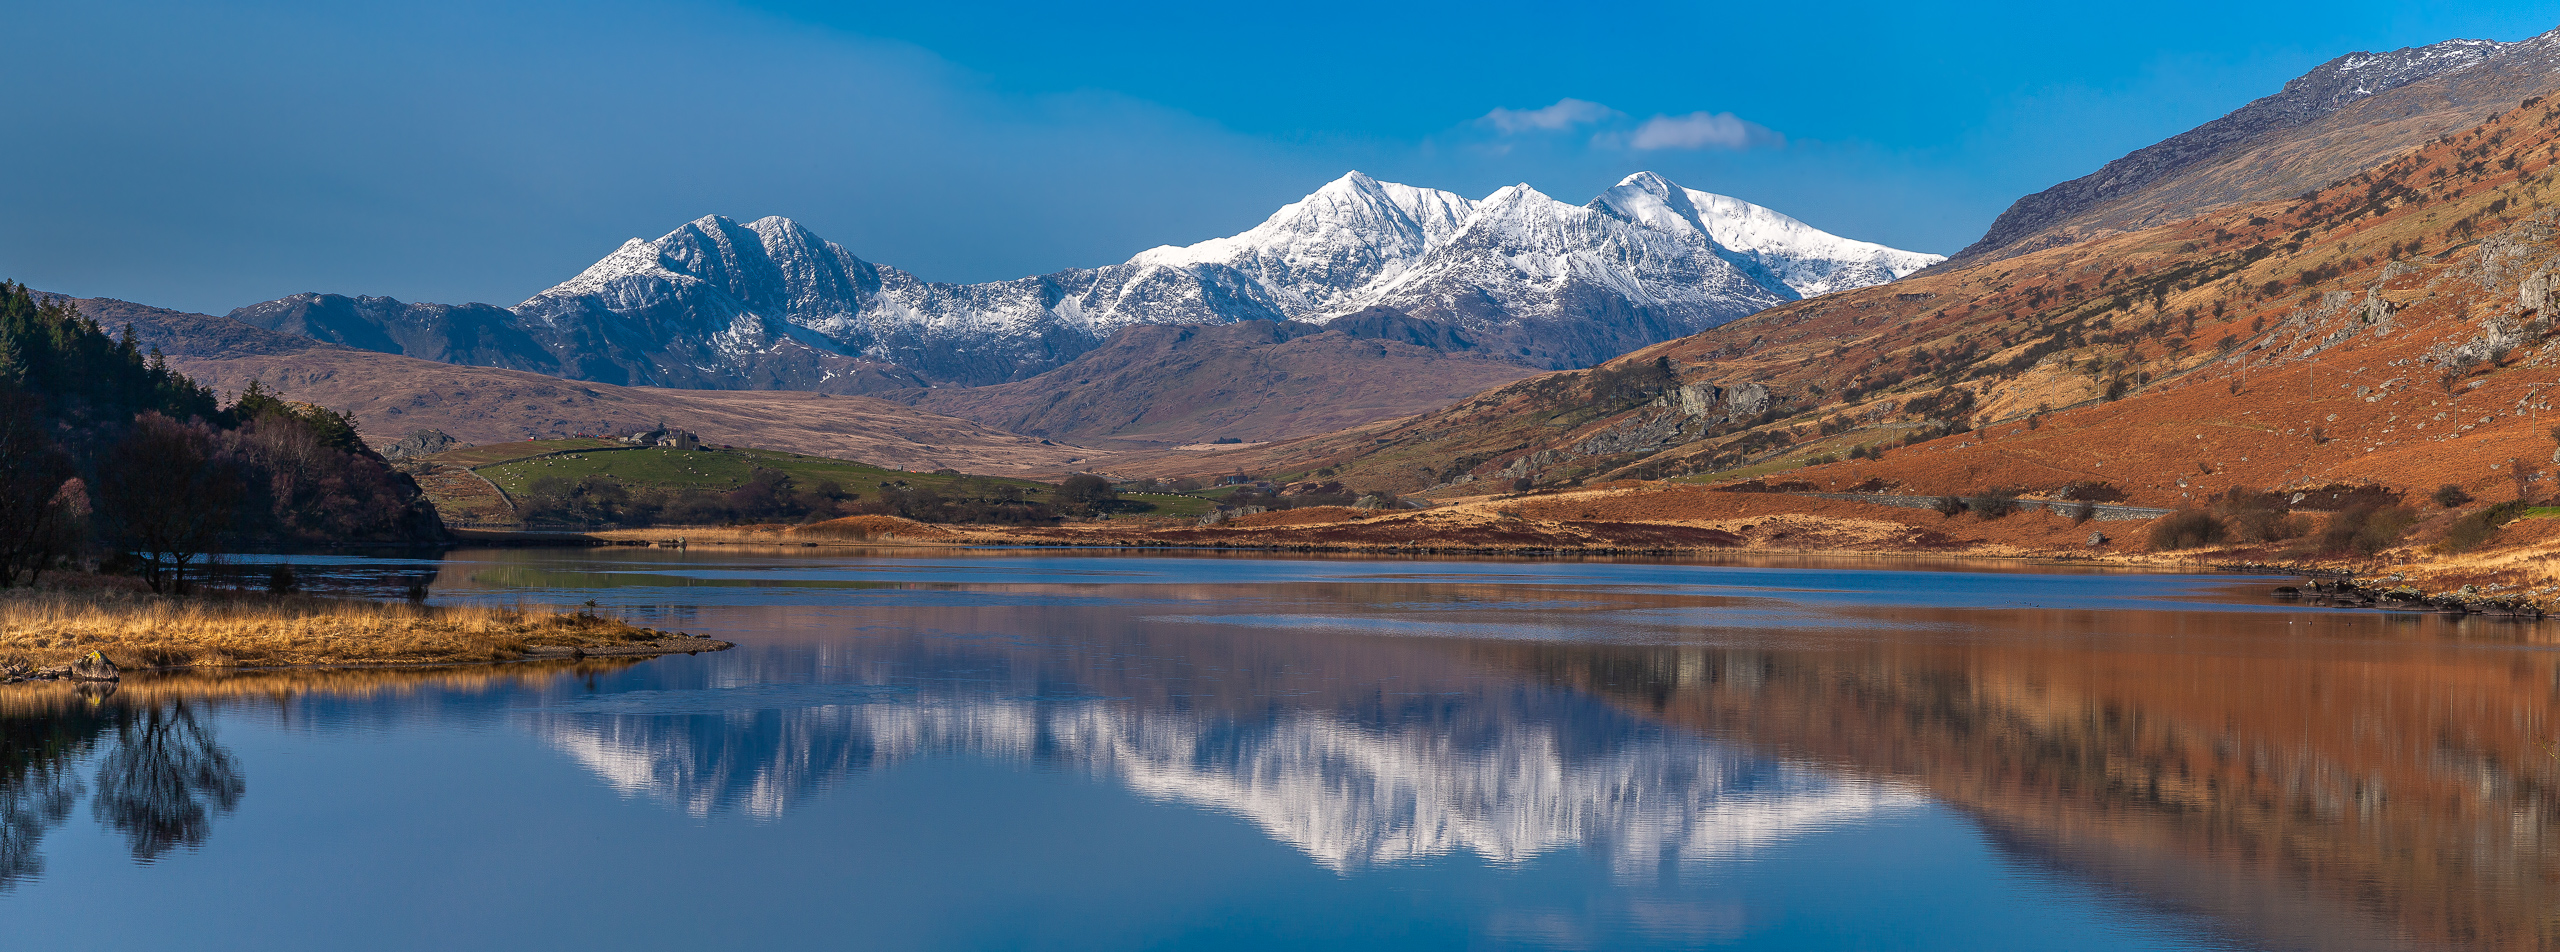 Snowdon Spring Reflections - A Fine Art Print by Mountain Images